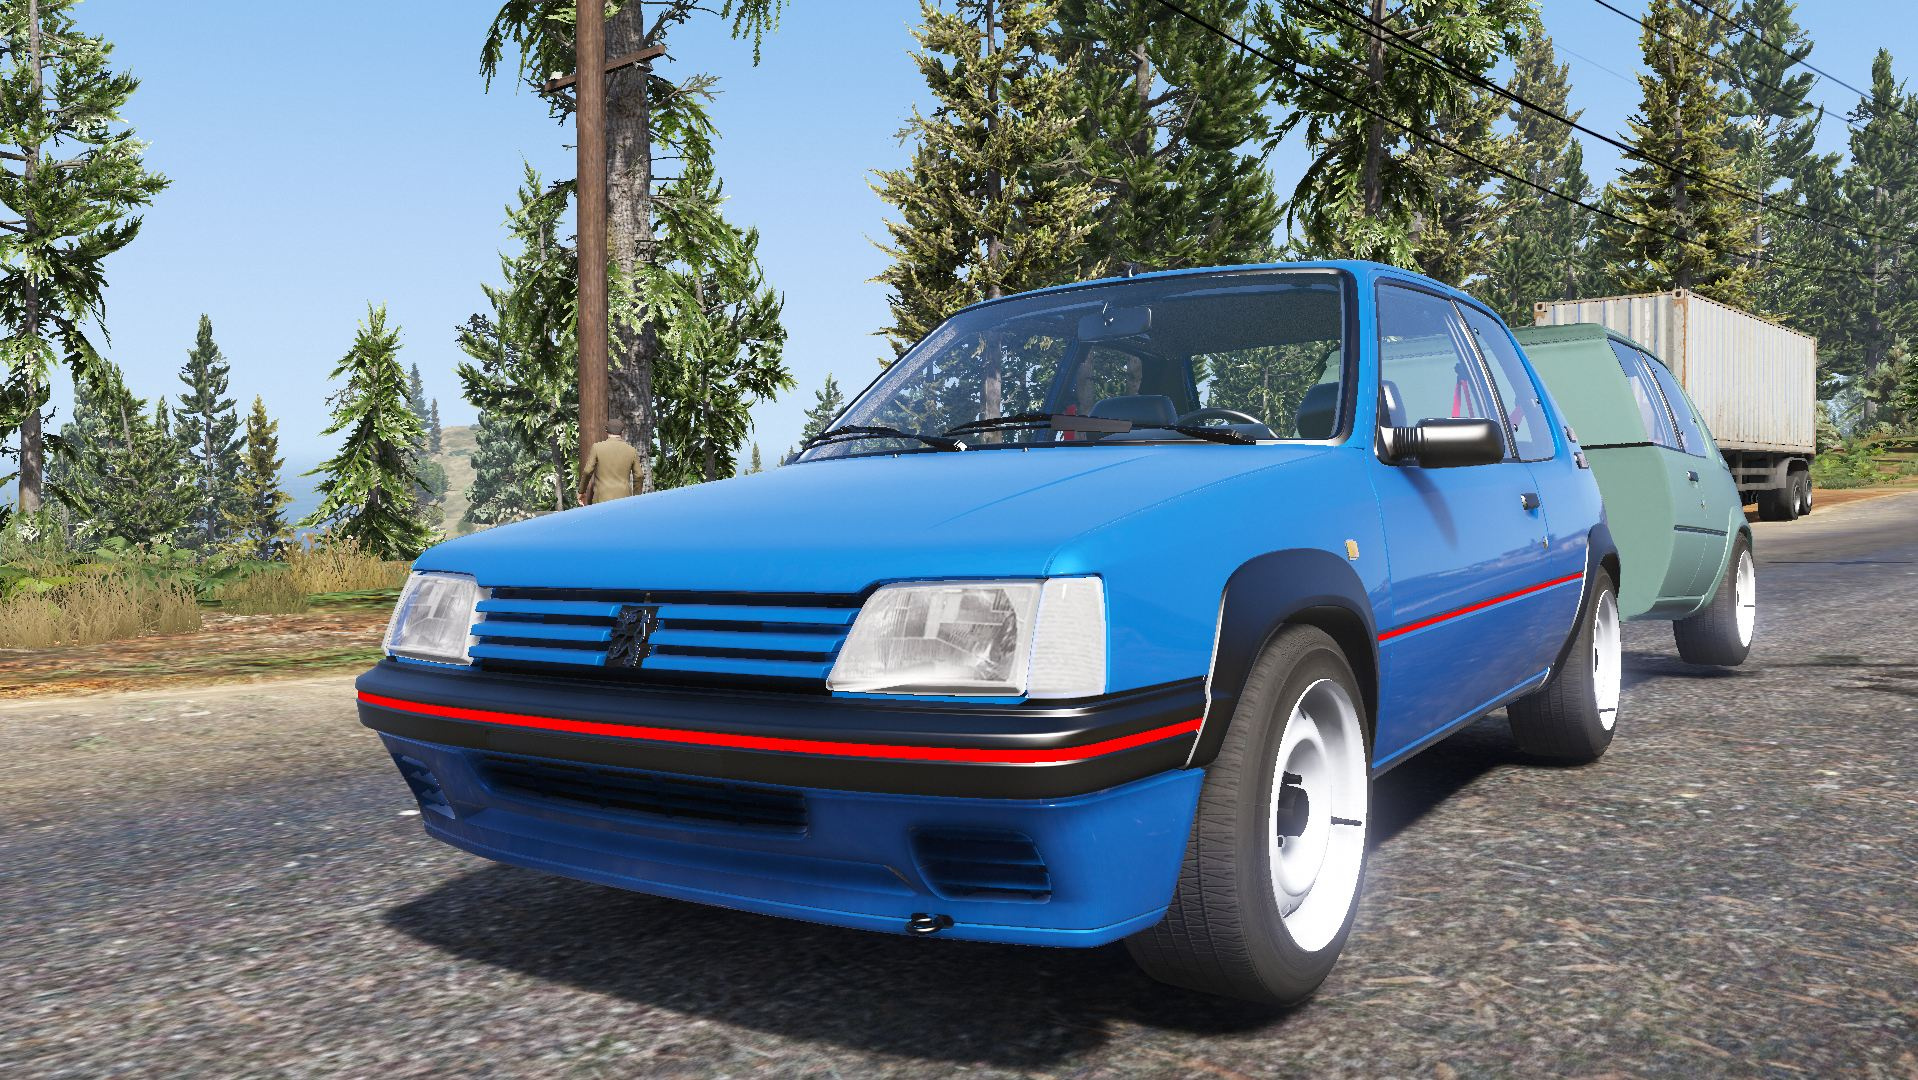 2003 Renault Clio V6 (Phase 2) [Add-On Tuning] - GTA5-Mods.com